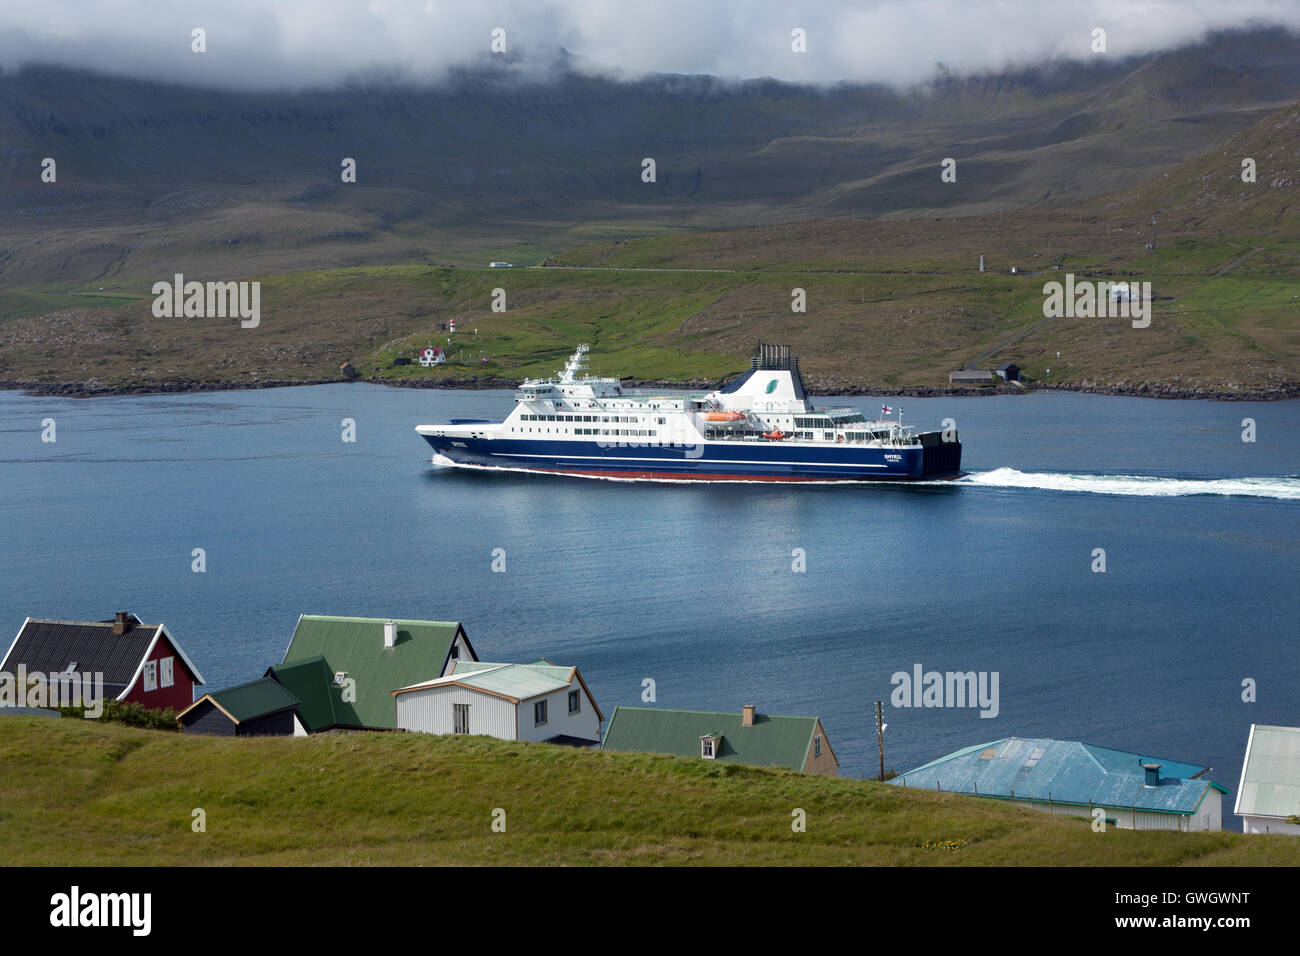 Suduroy, Faroe Islands - June 11, 2011 : Passenger Ferry sailing in a fjord on the route from Suduroy to Torshavn Stock Photo